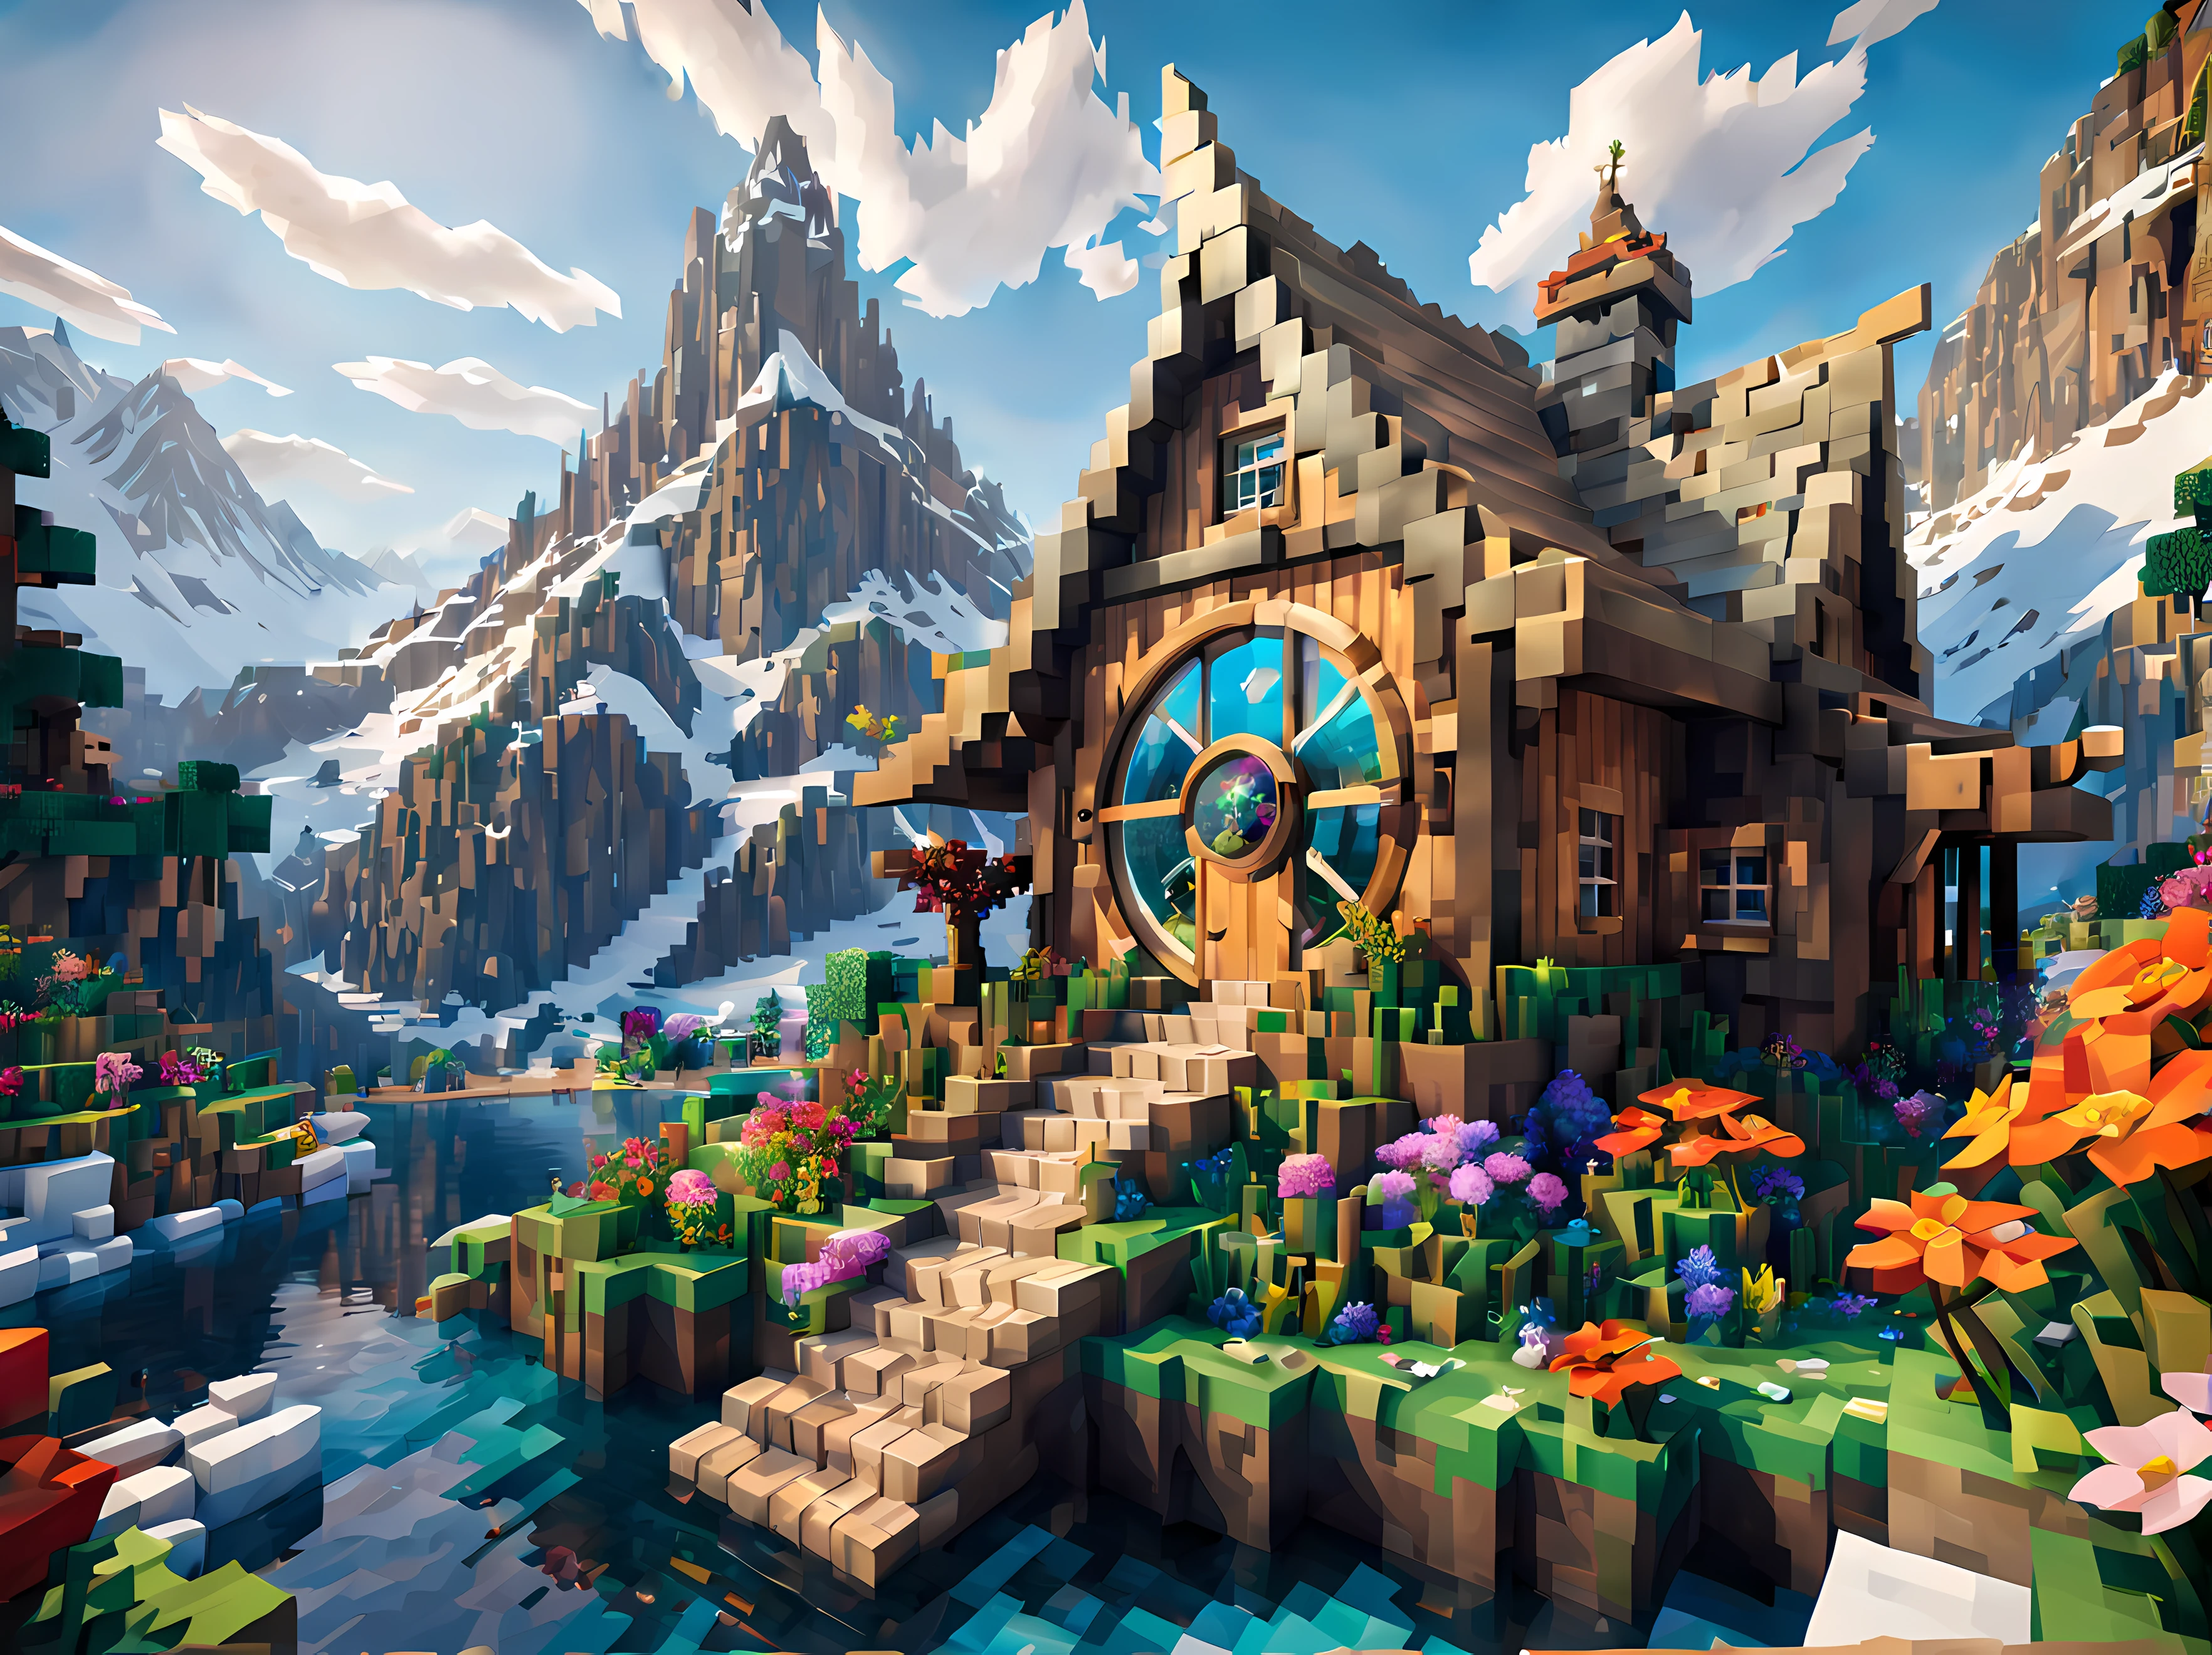 Minecraft style (Ultrarealistic:1.3), big (fairy) cabin with round windows, environmental artwork, environmental art, elegant decorations, feast, pound, (fishing), (beautiful:1.4), (attractive:1.3), epic snowy mountains, windy summer nature, blocky, pixelated, vibrant colors, (dragon in the sky), flowers